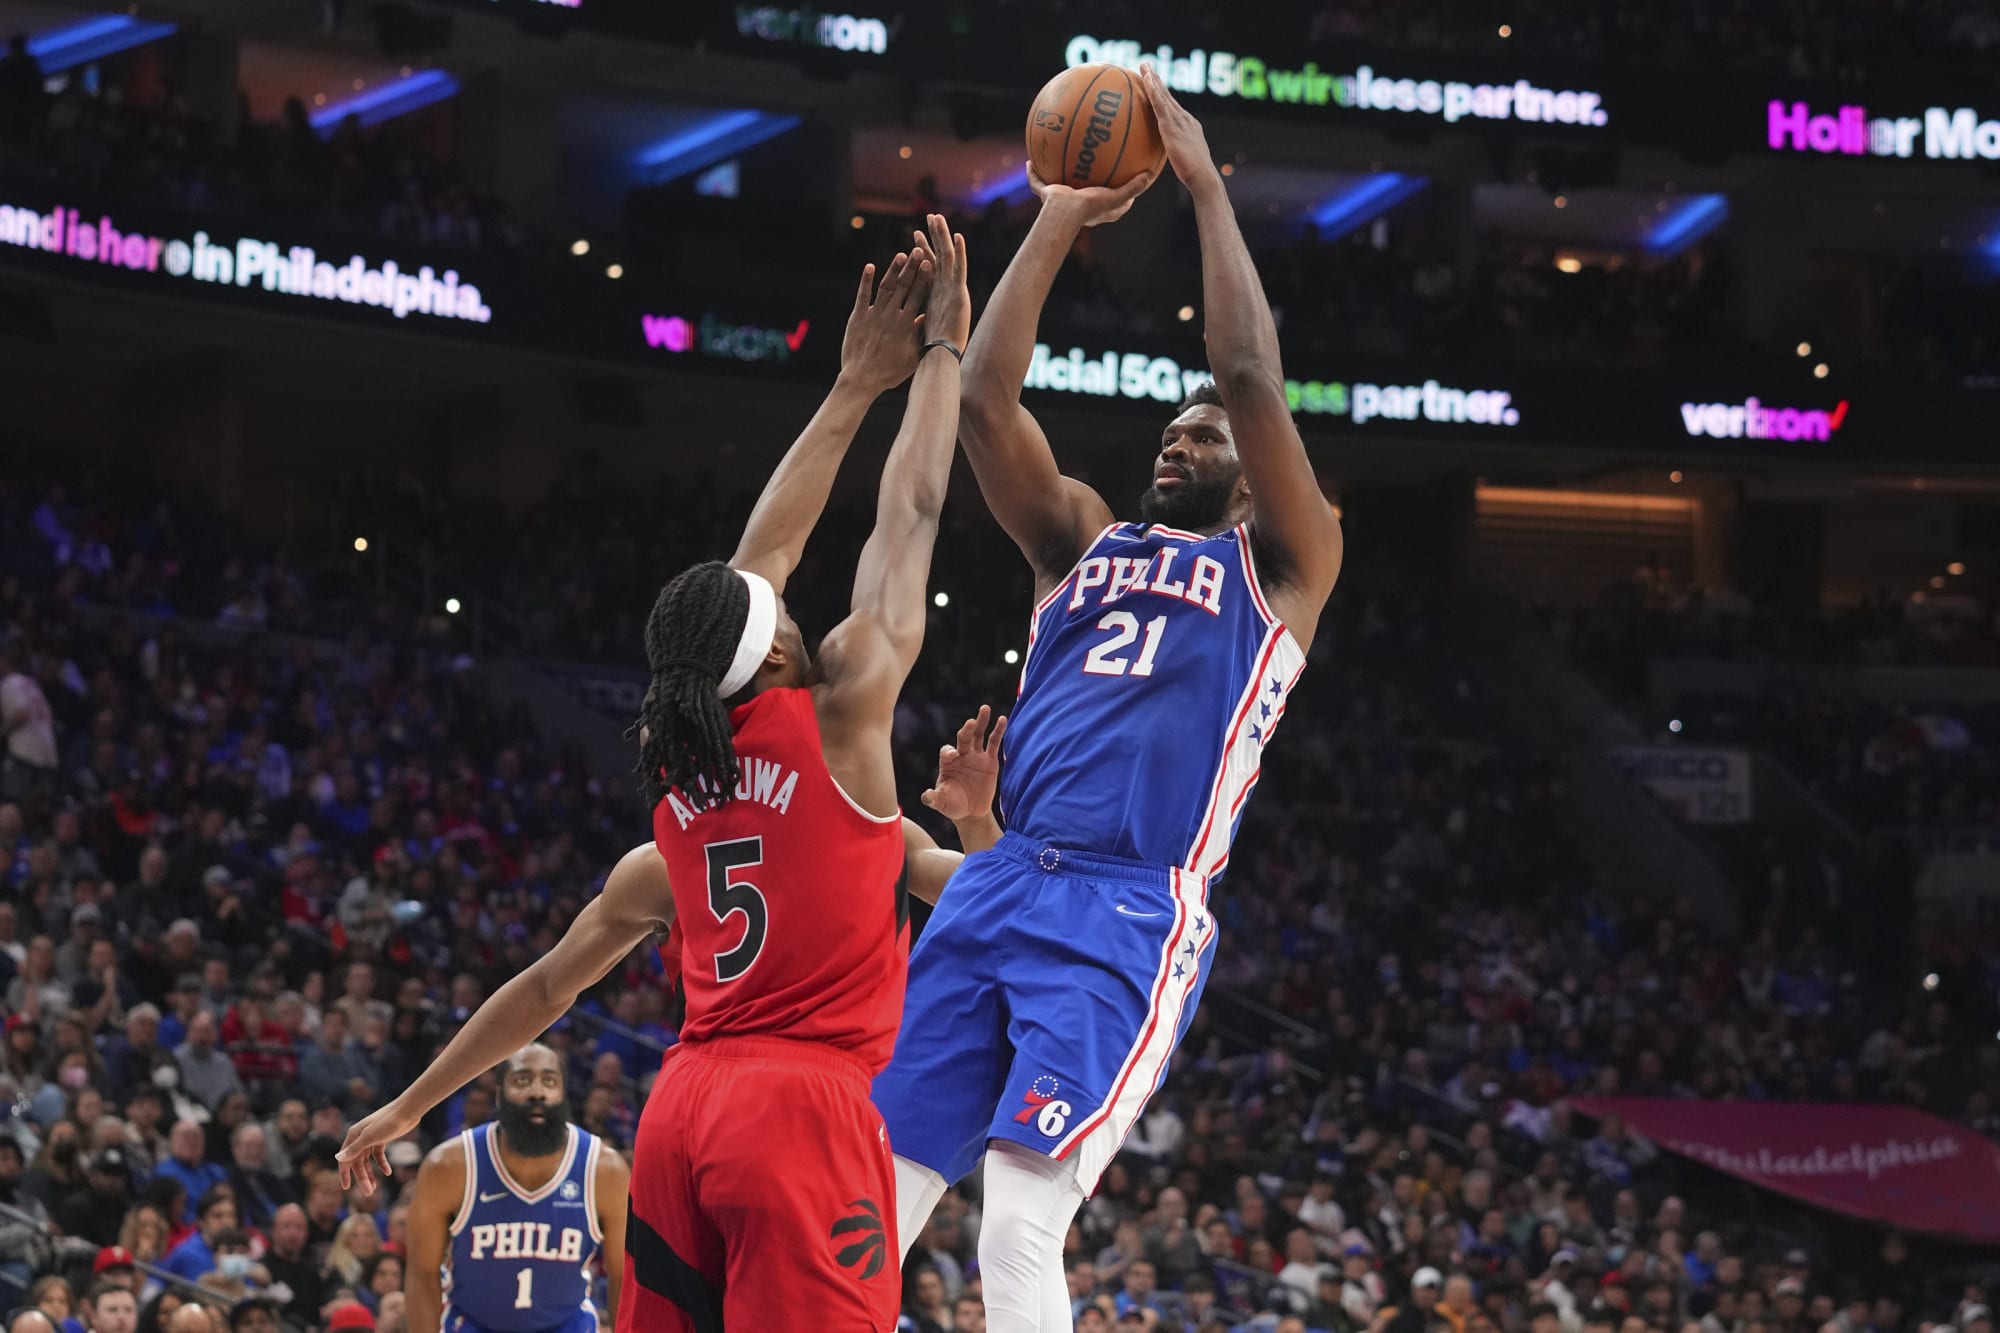 Raptors fans react to Joel Embiid, 76ers playoff elimination